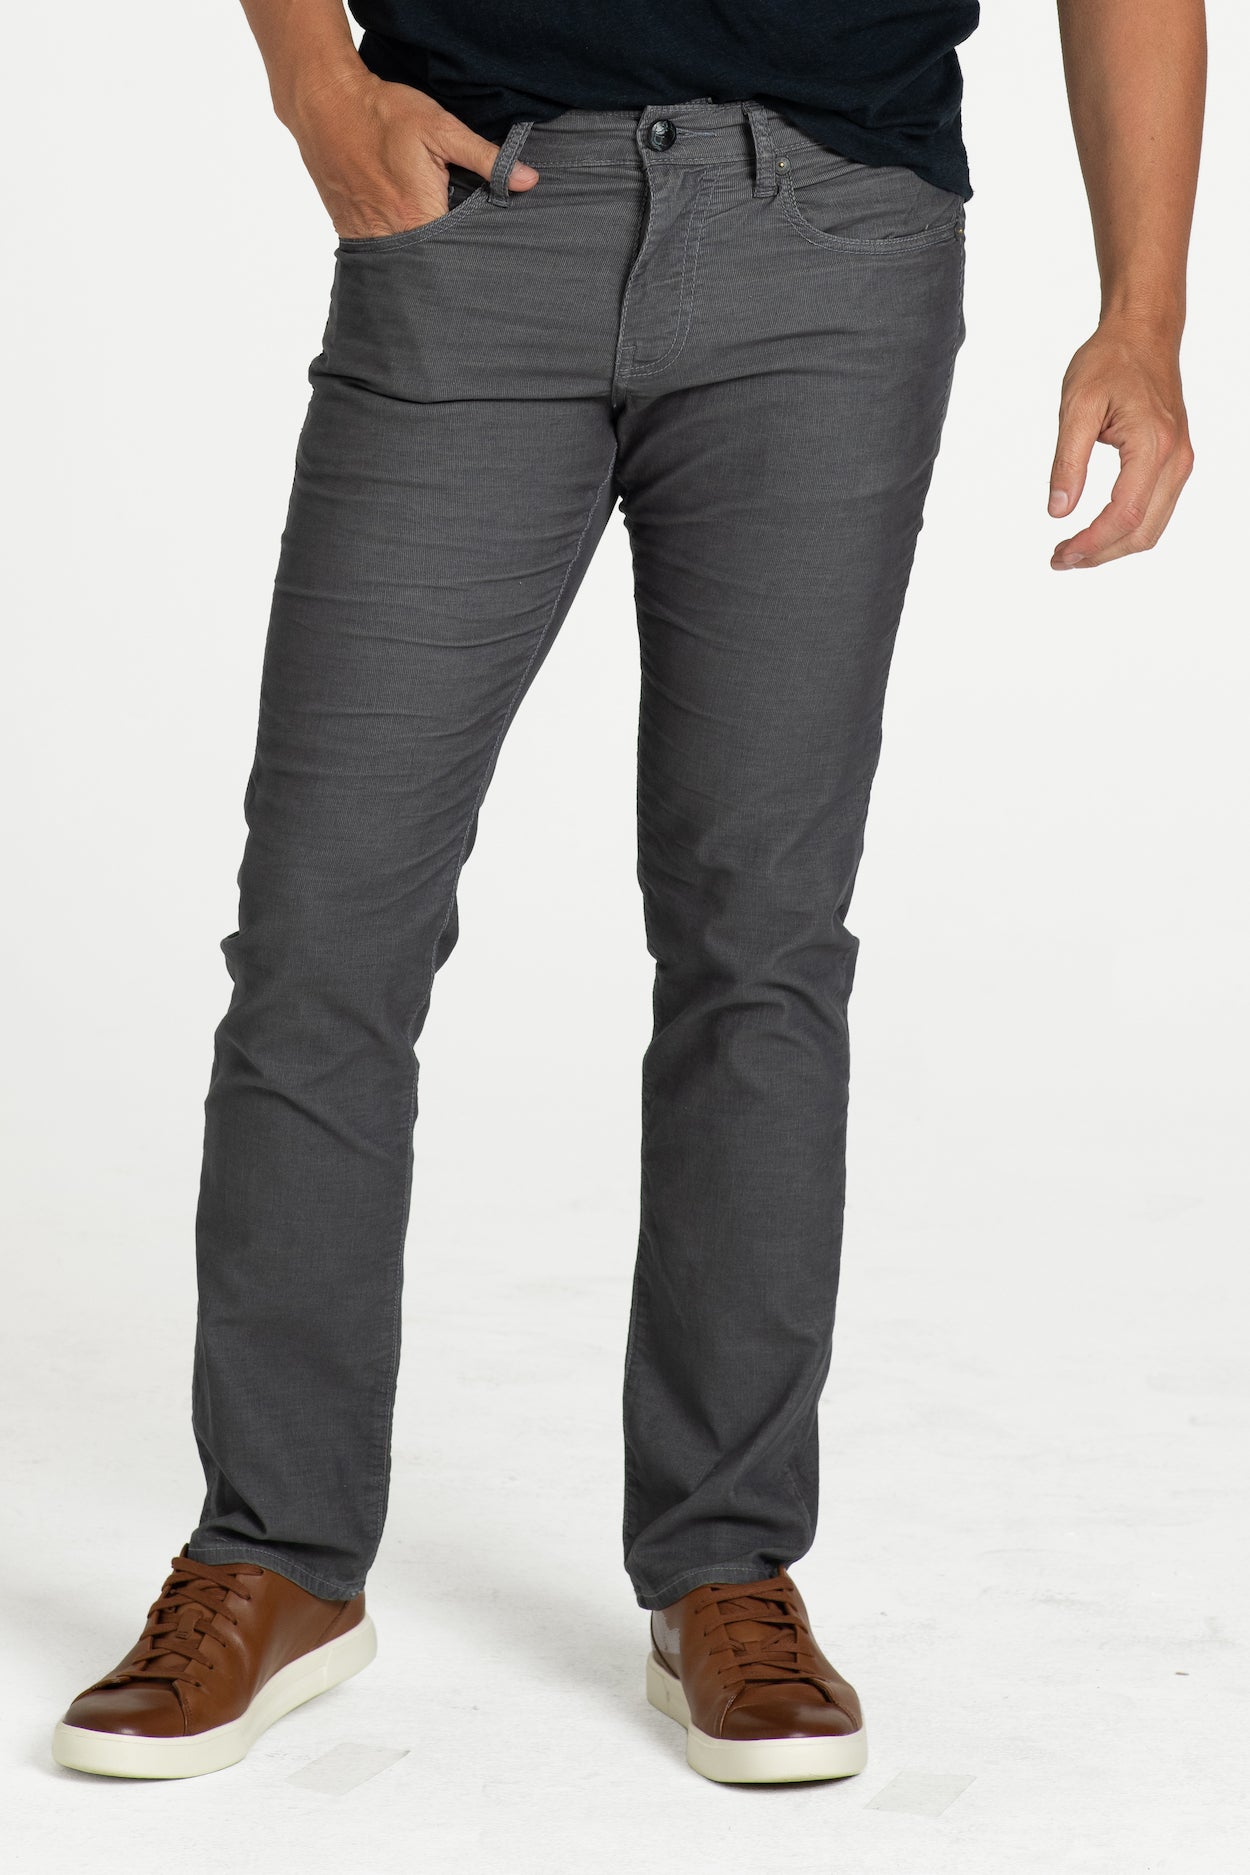 BARFLY SLIM CORD PANTS IN STORM